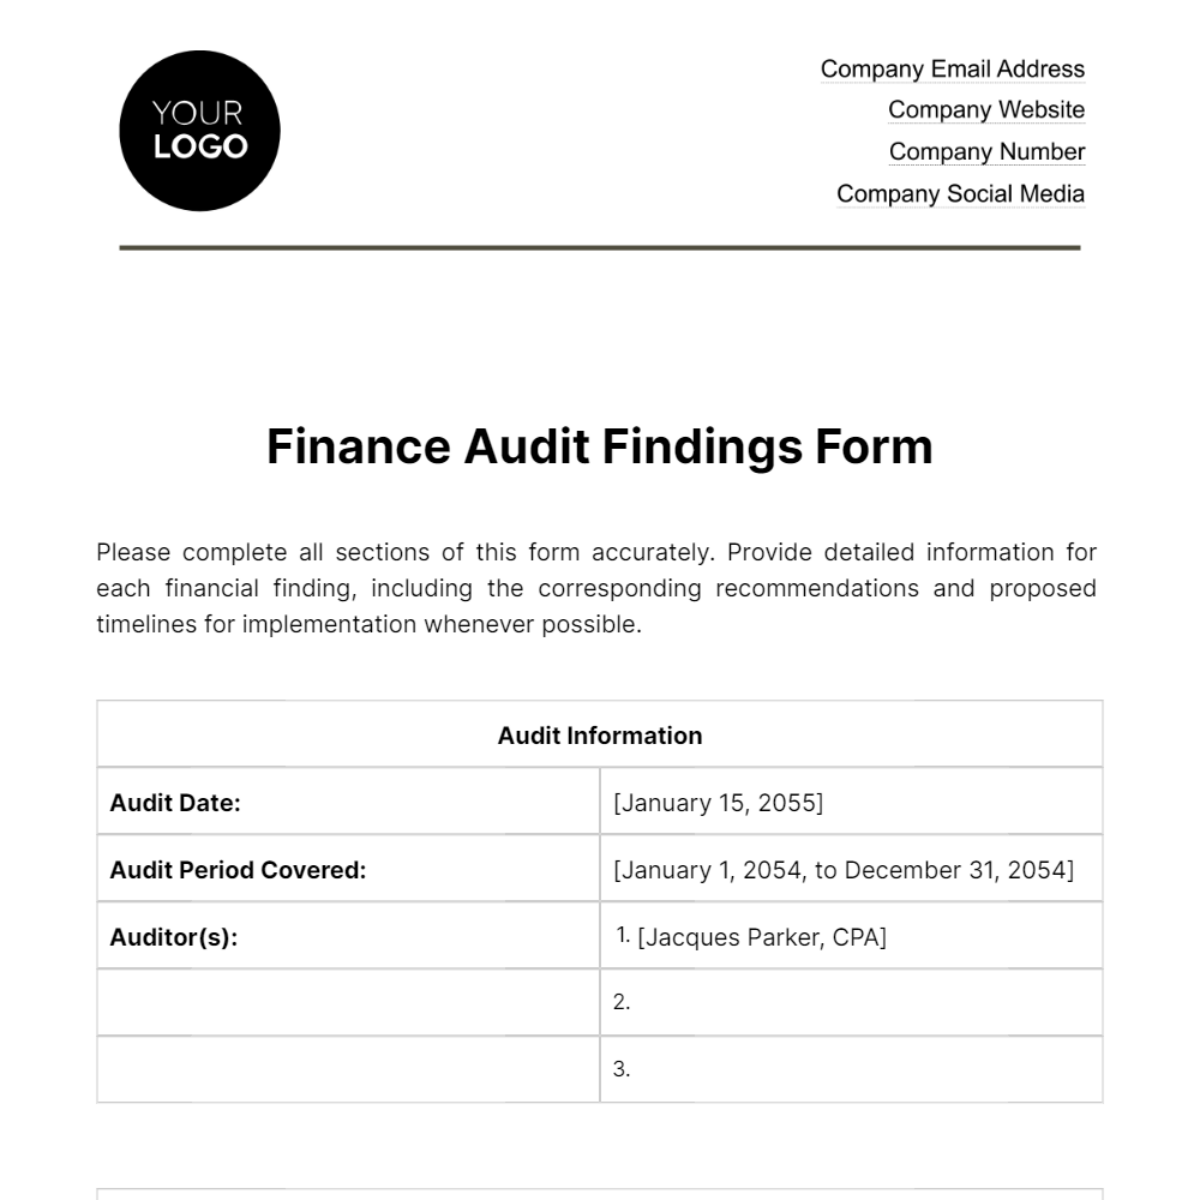 Finance Audit Findings Form Template